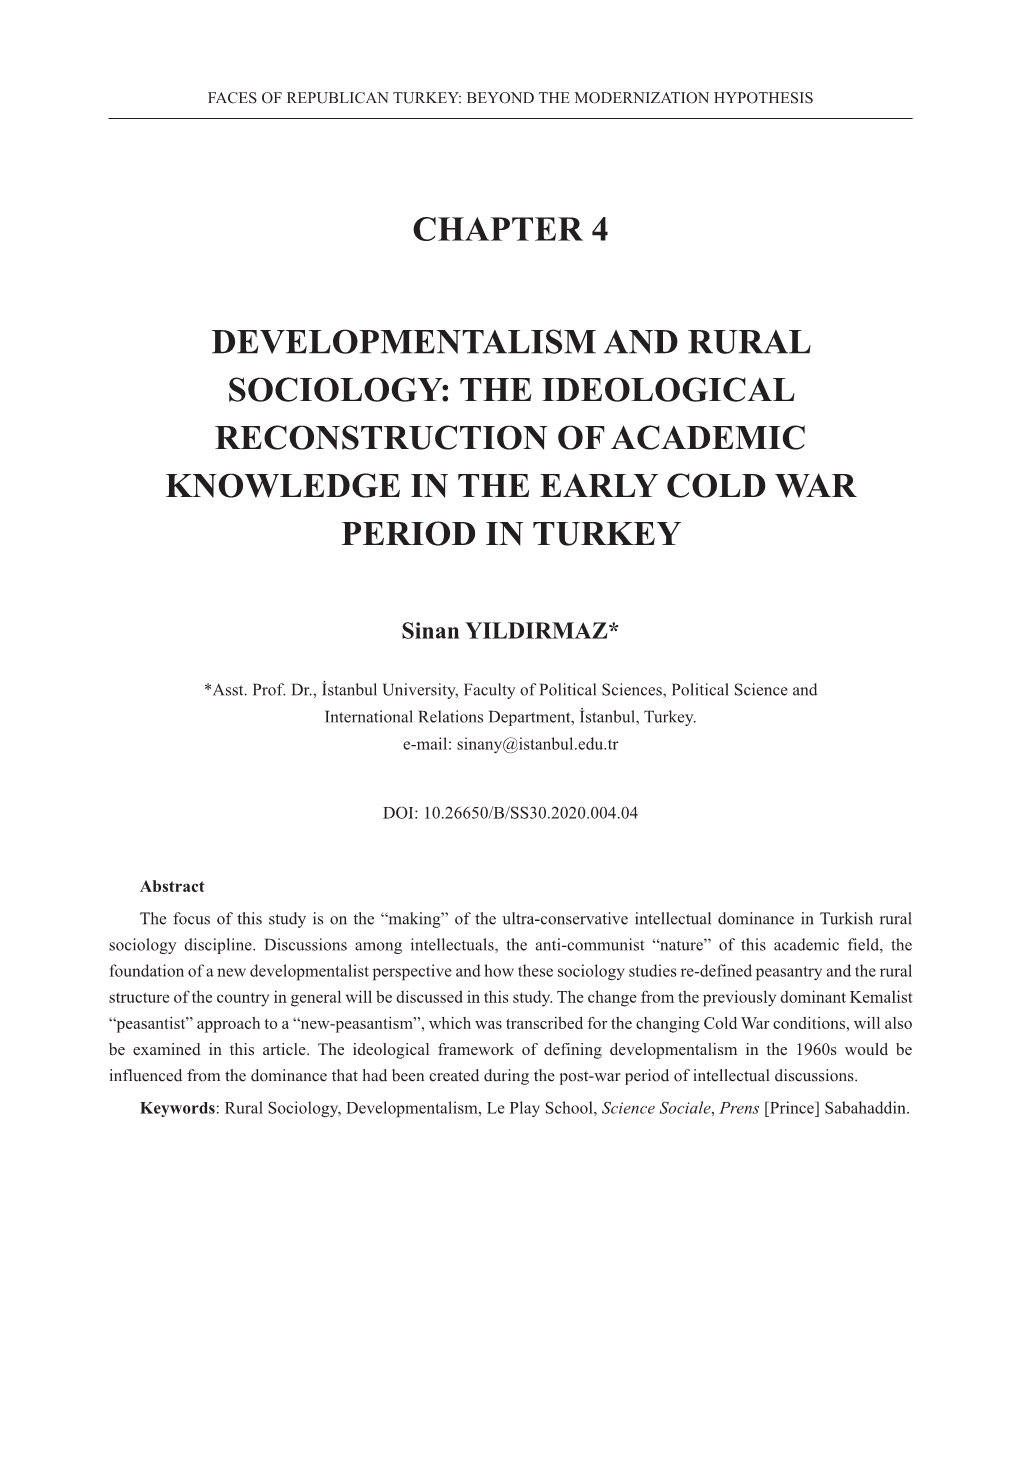 Chapter 4 Developmentalism and Rural Sociology: The